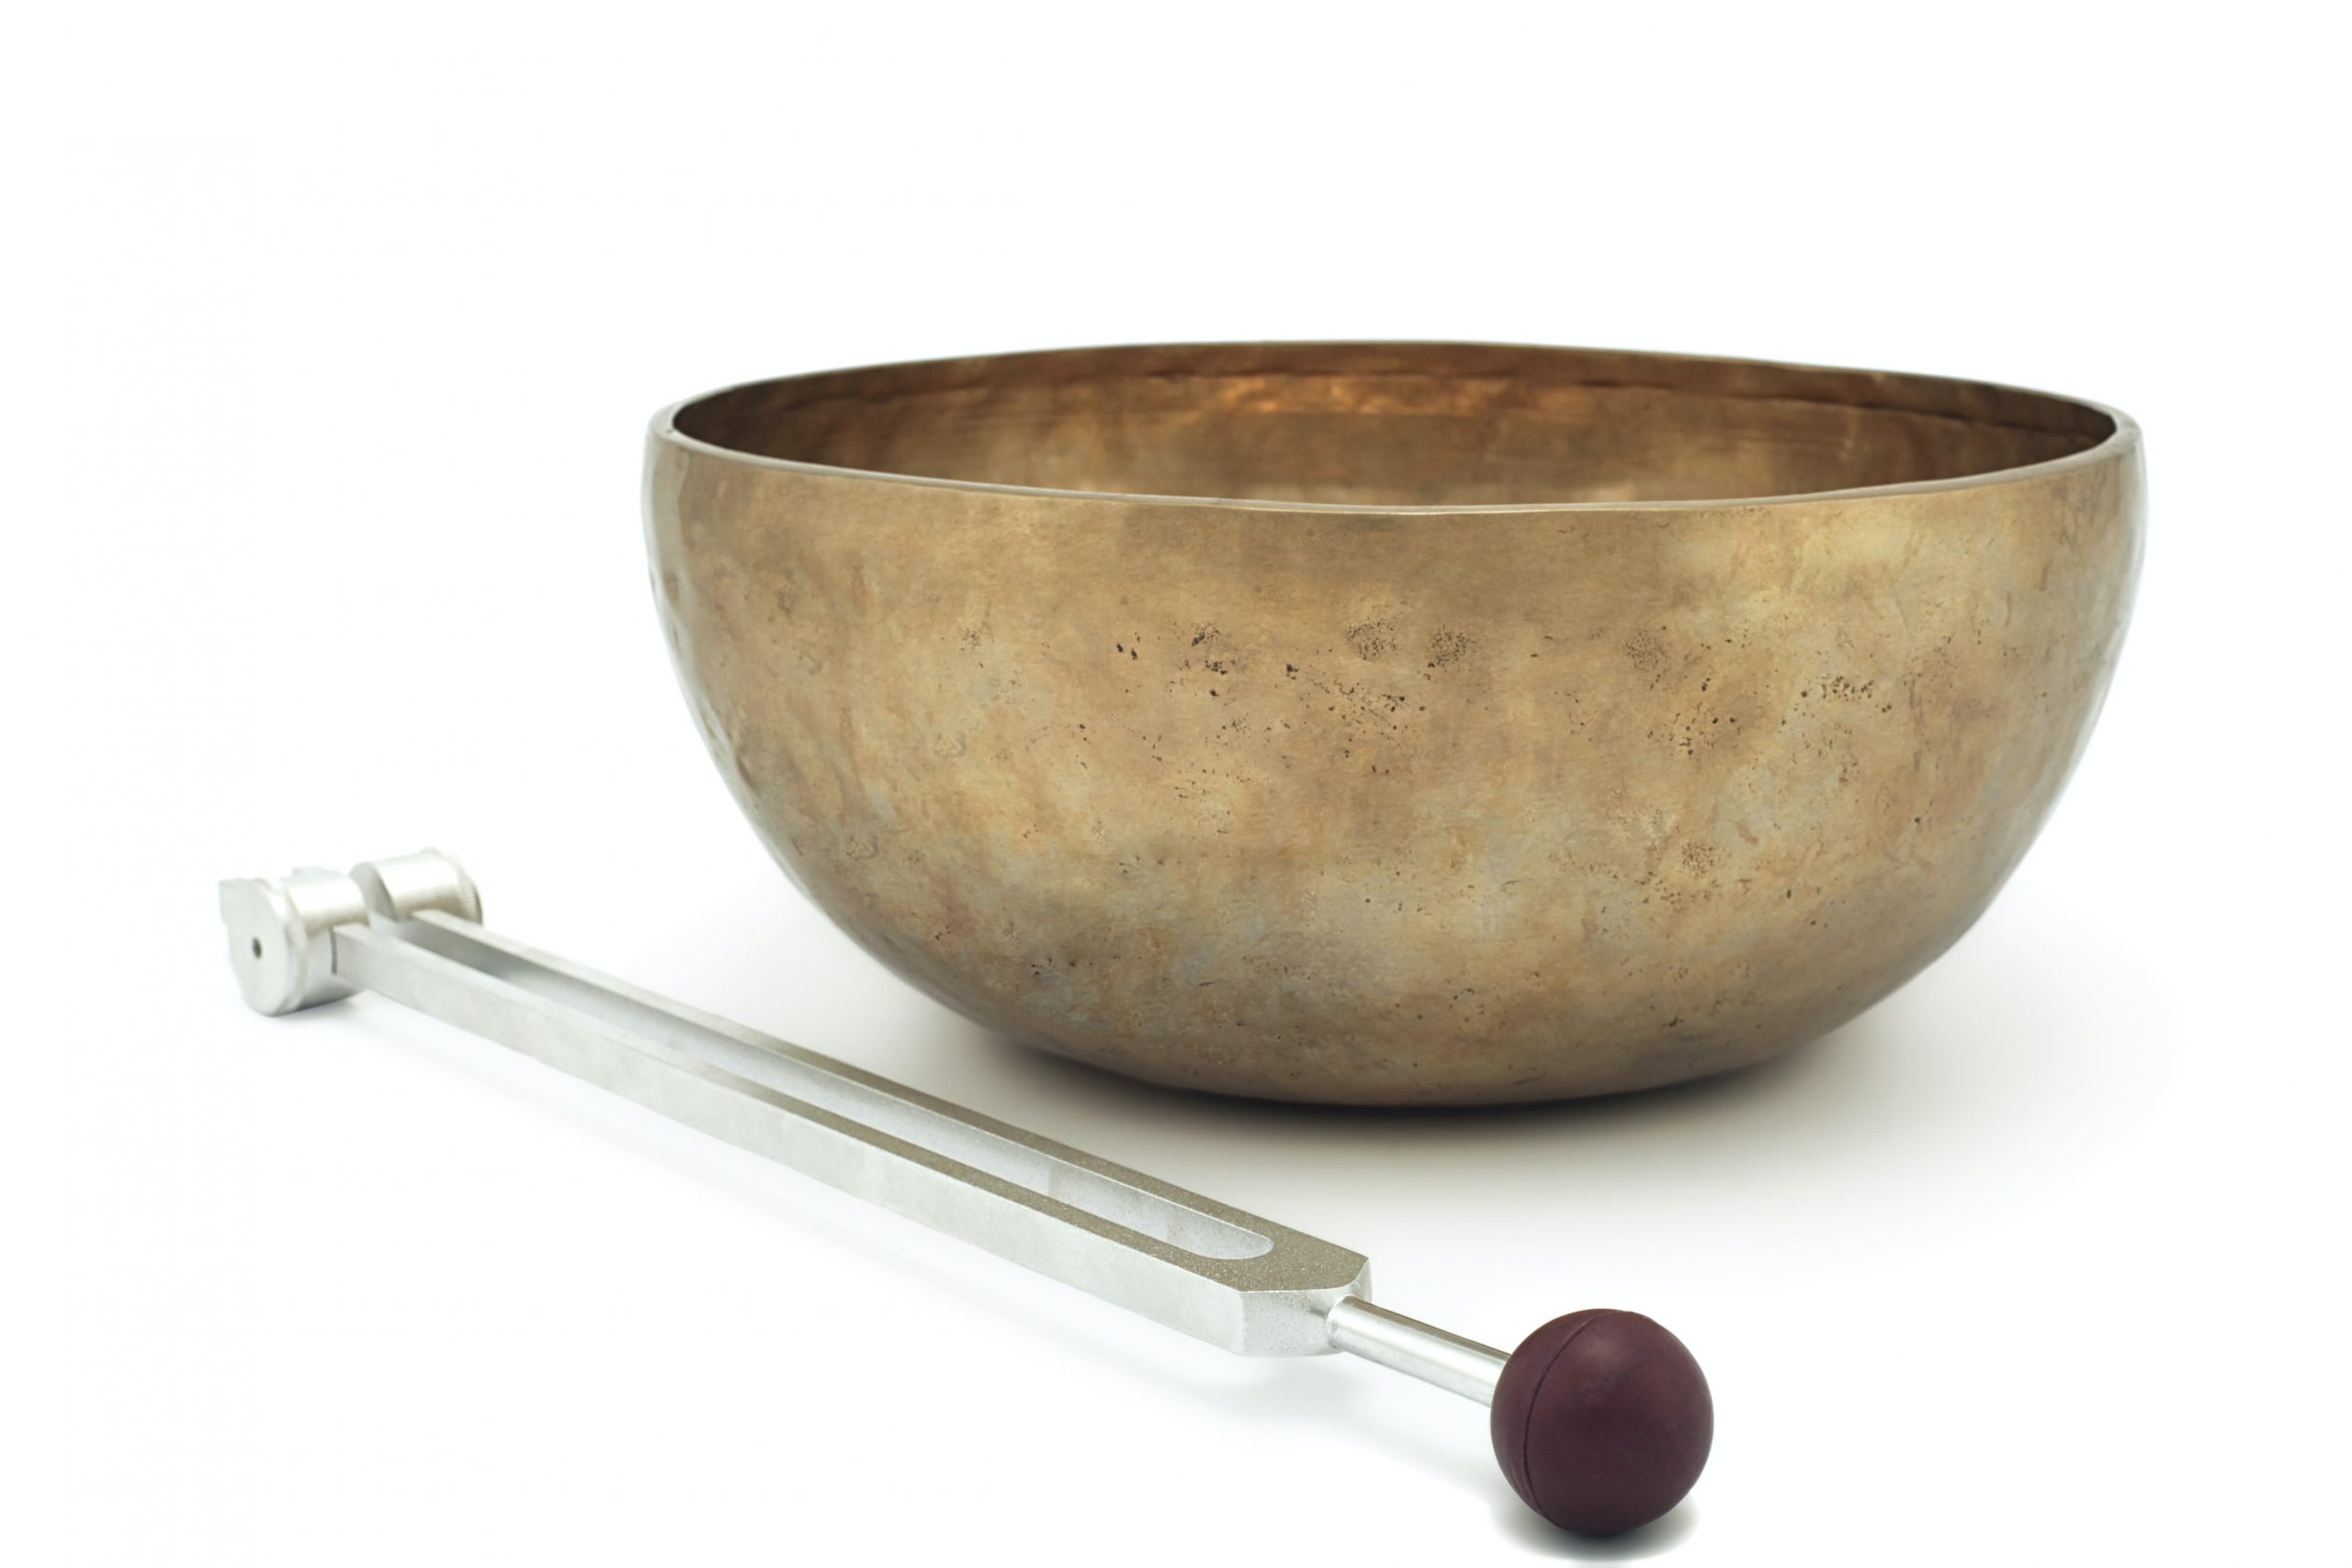 weighted tuning fork and singing bowl